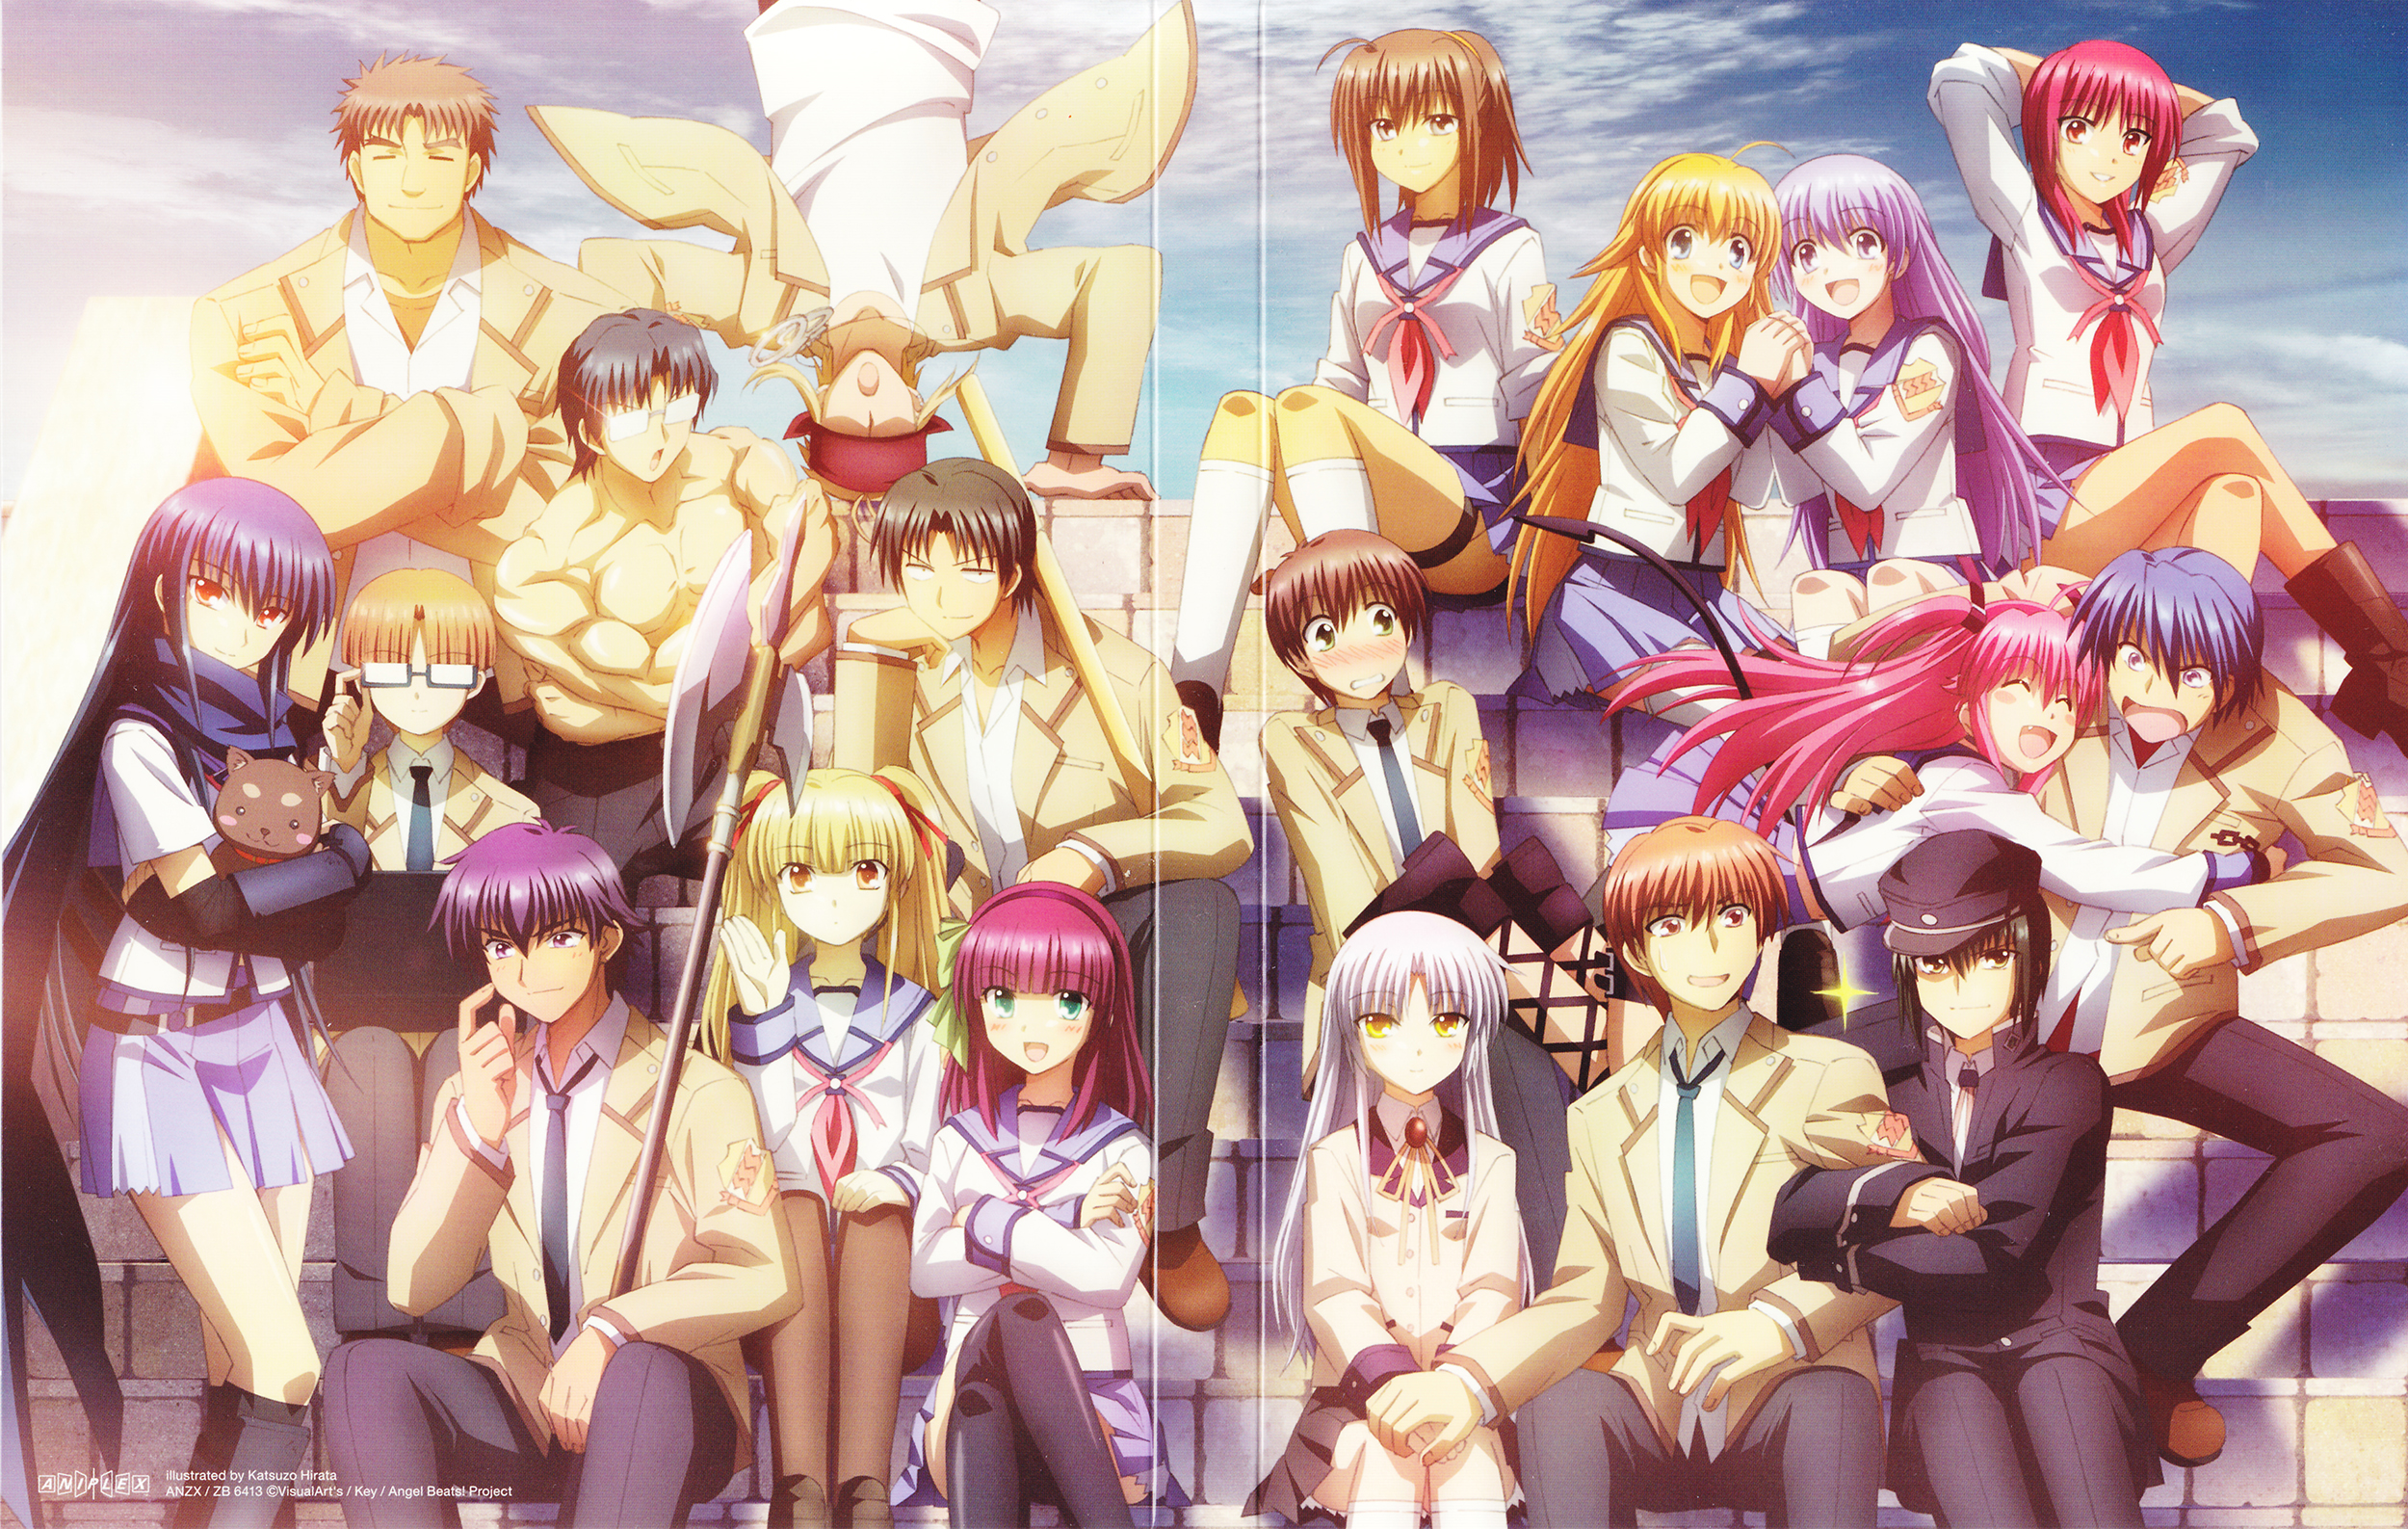 Angel Beats! Picture